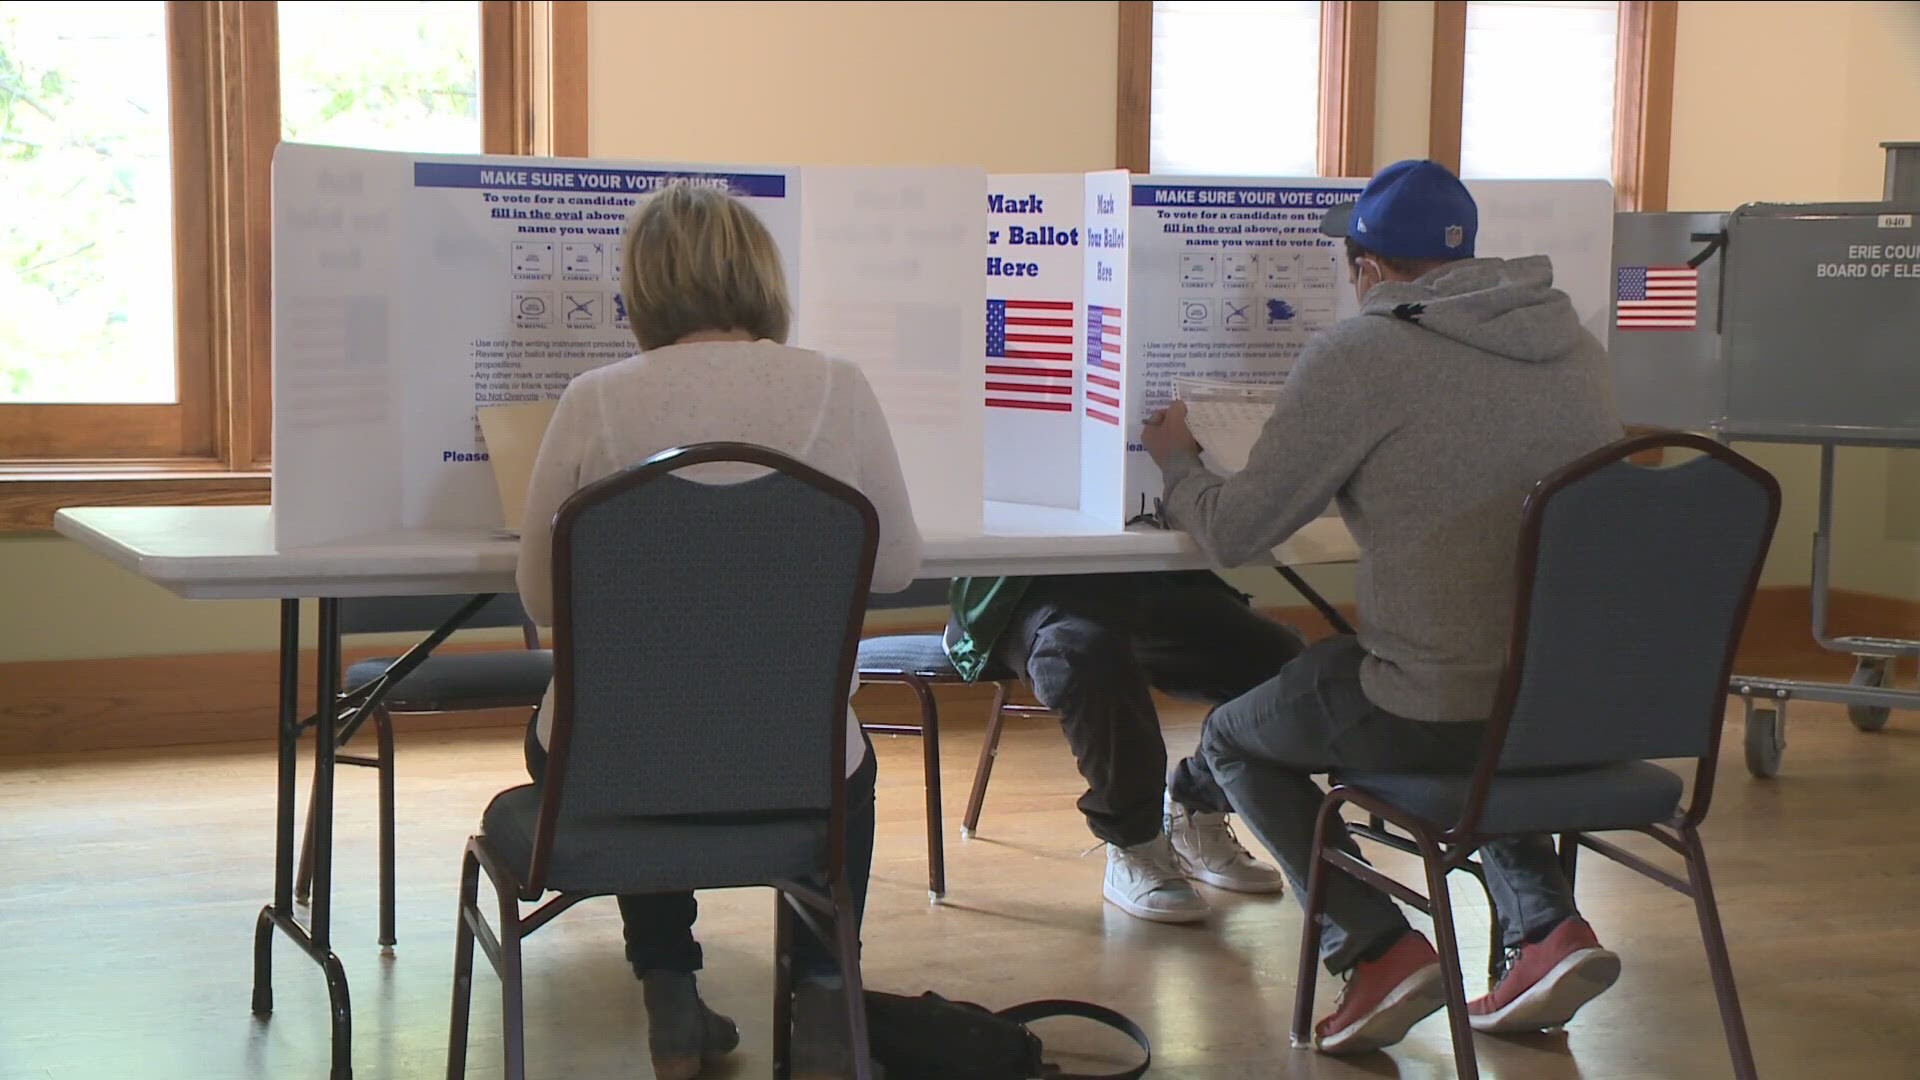 Voter apathy was a concern addressed with this legislation, according to the governor's office.